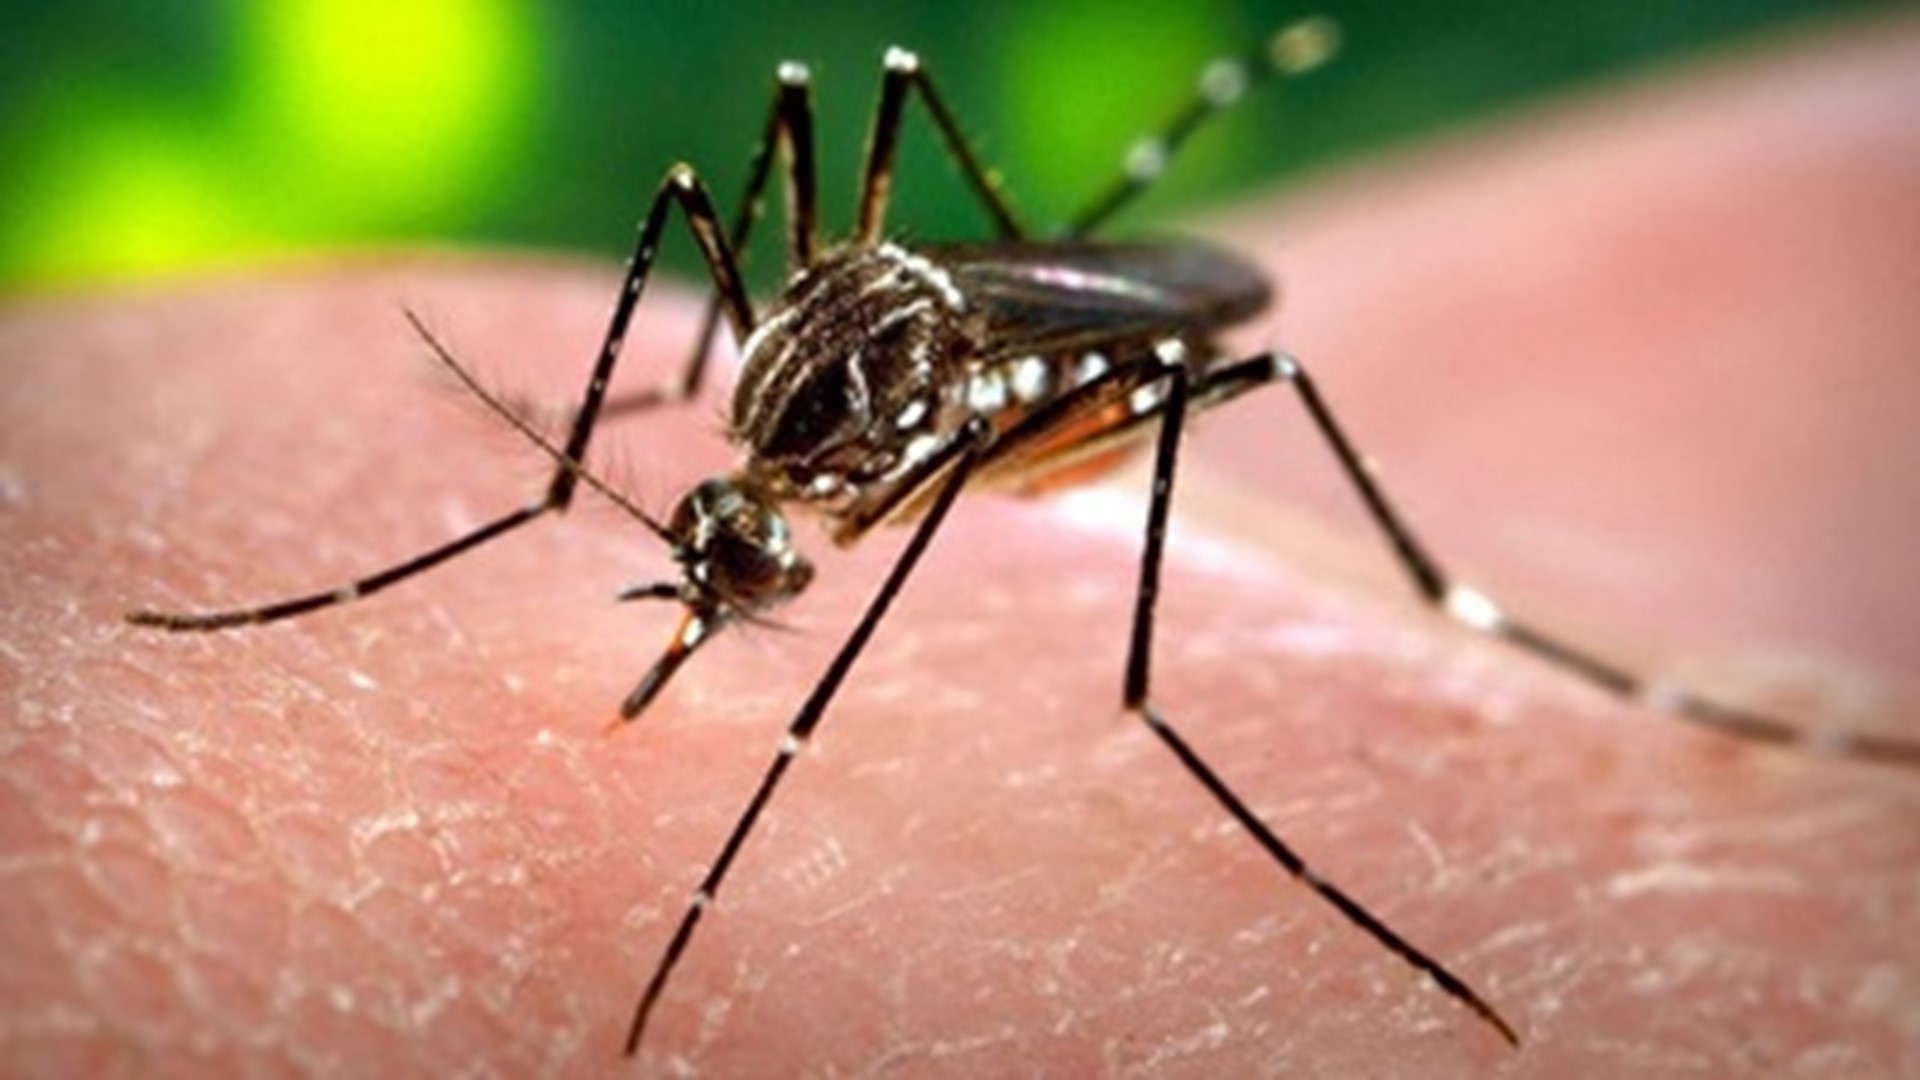 Iowa HHS says six Iowans were diagnosed with West Nile last year, but nobody died.